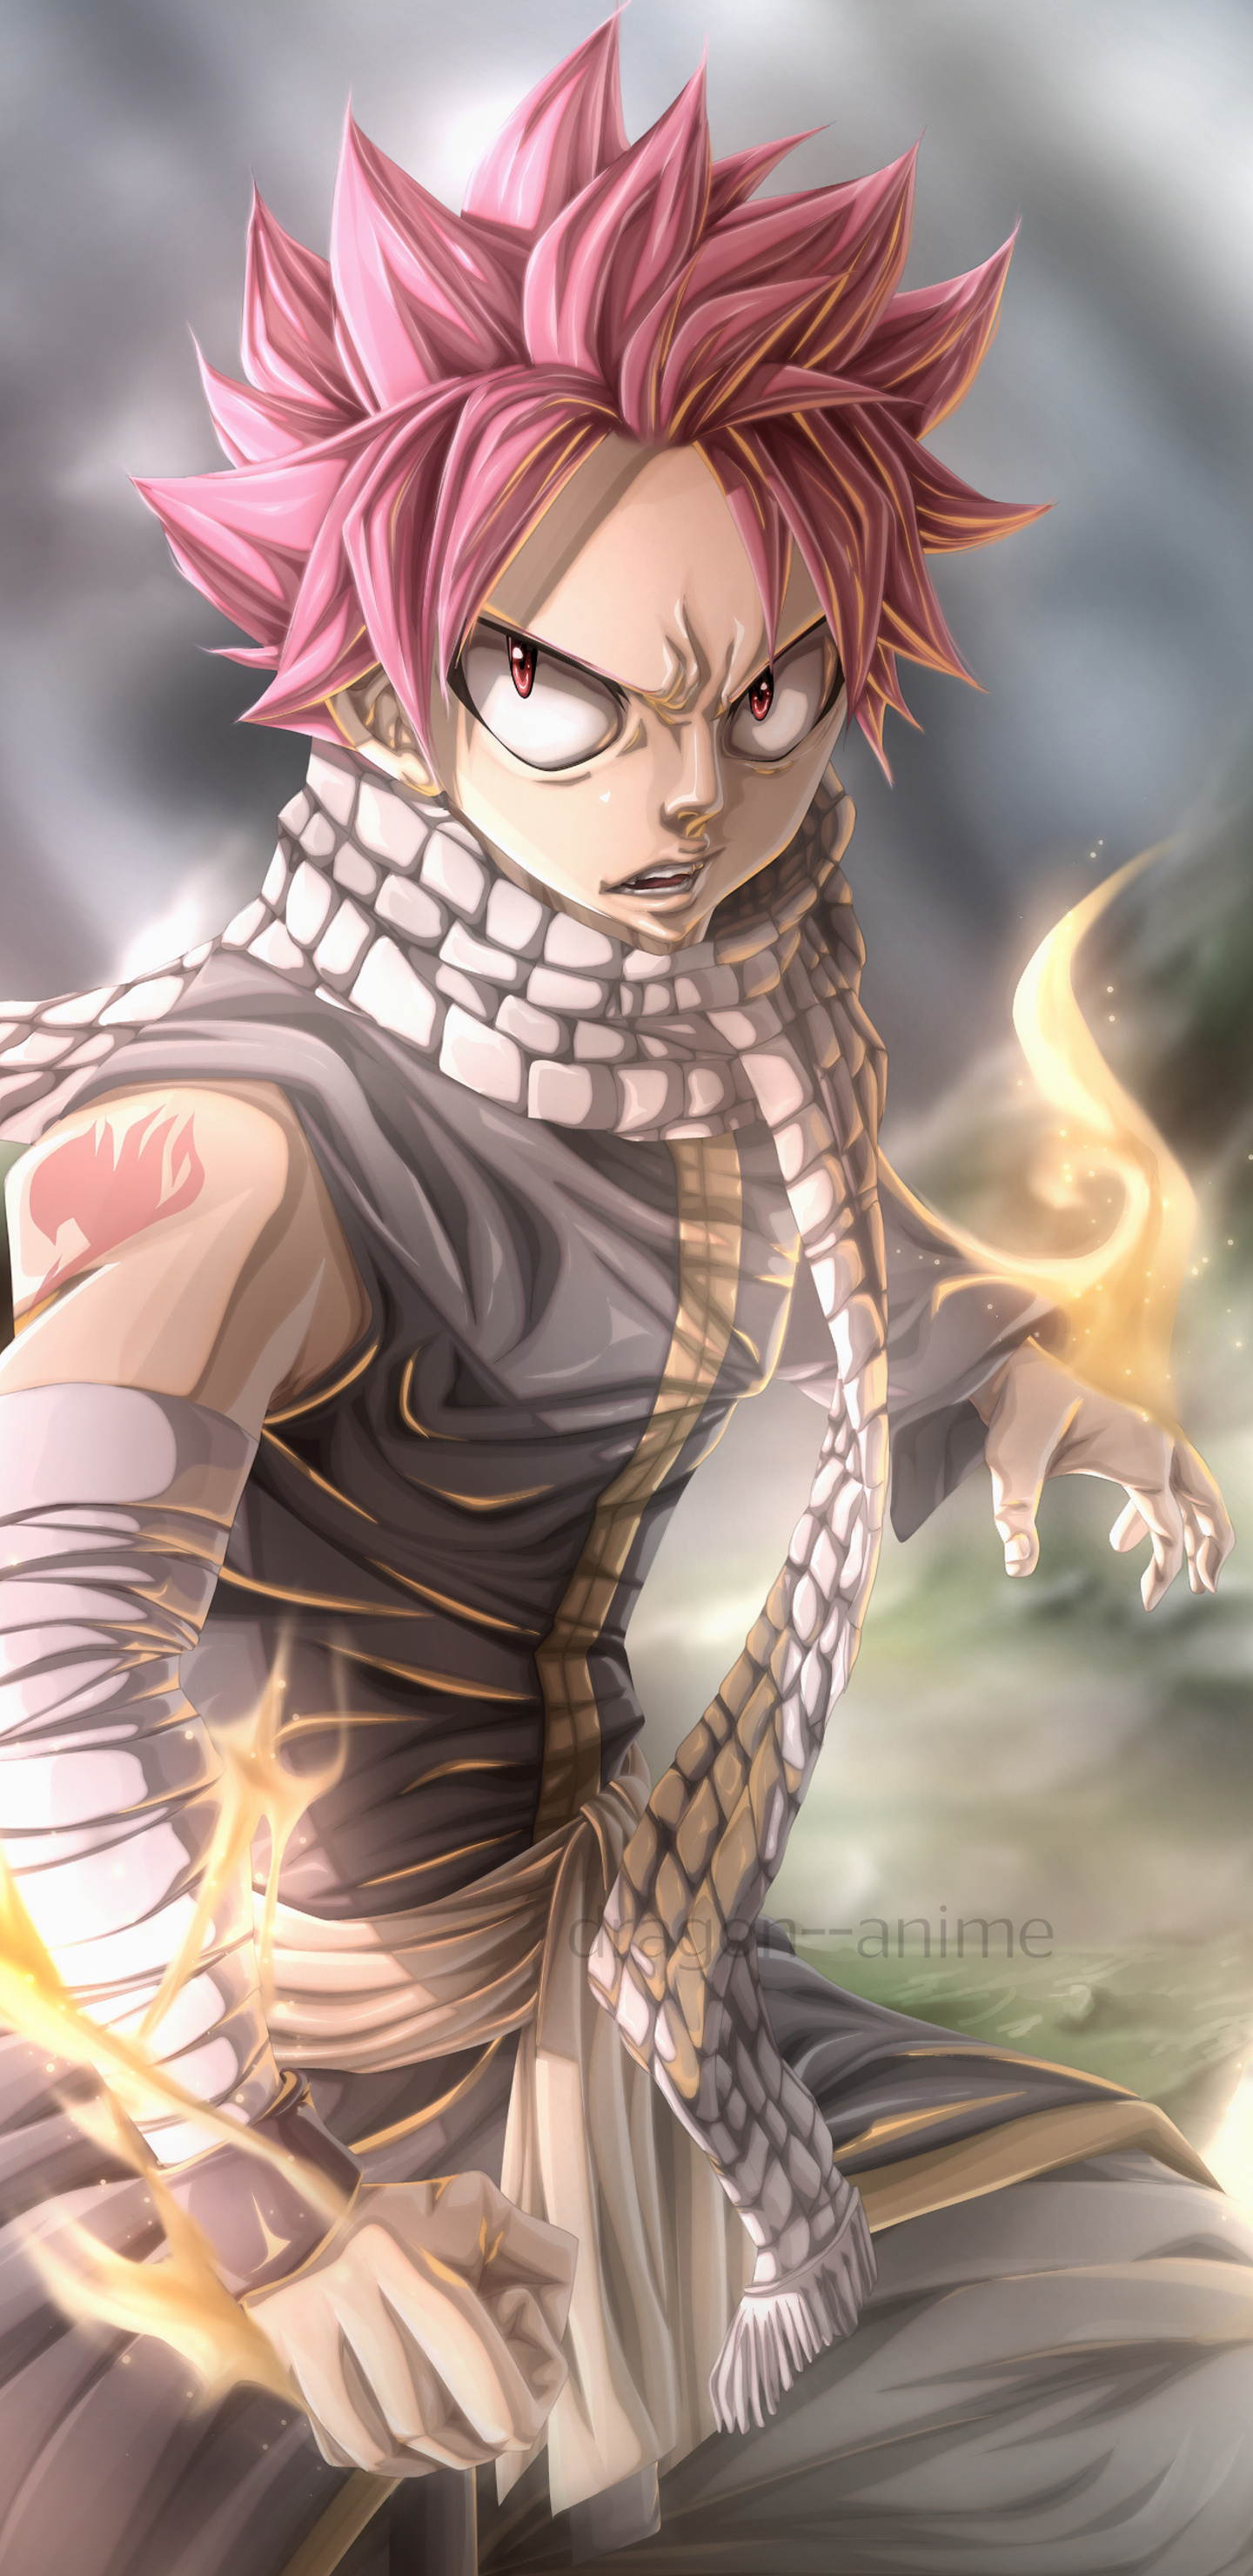 Natsu (Fairy Tail): A wizard who has the ability to eat, breathe, and strike with fire. 1440x2960 HD Background.